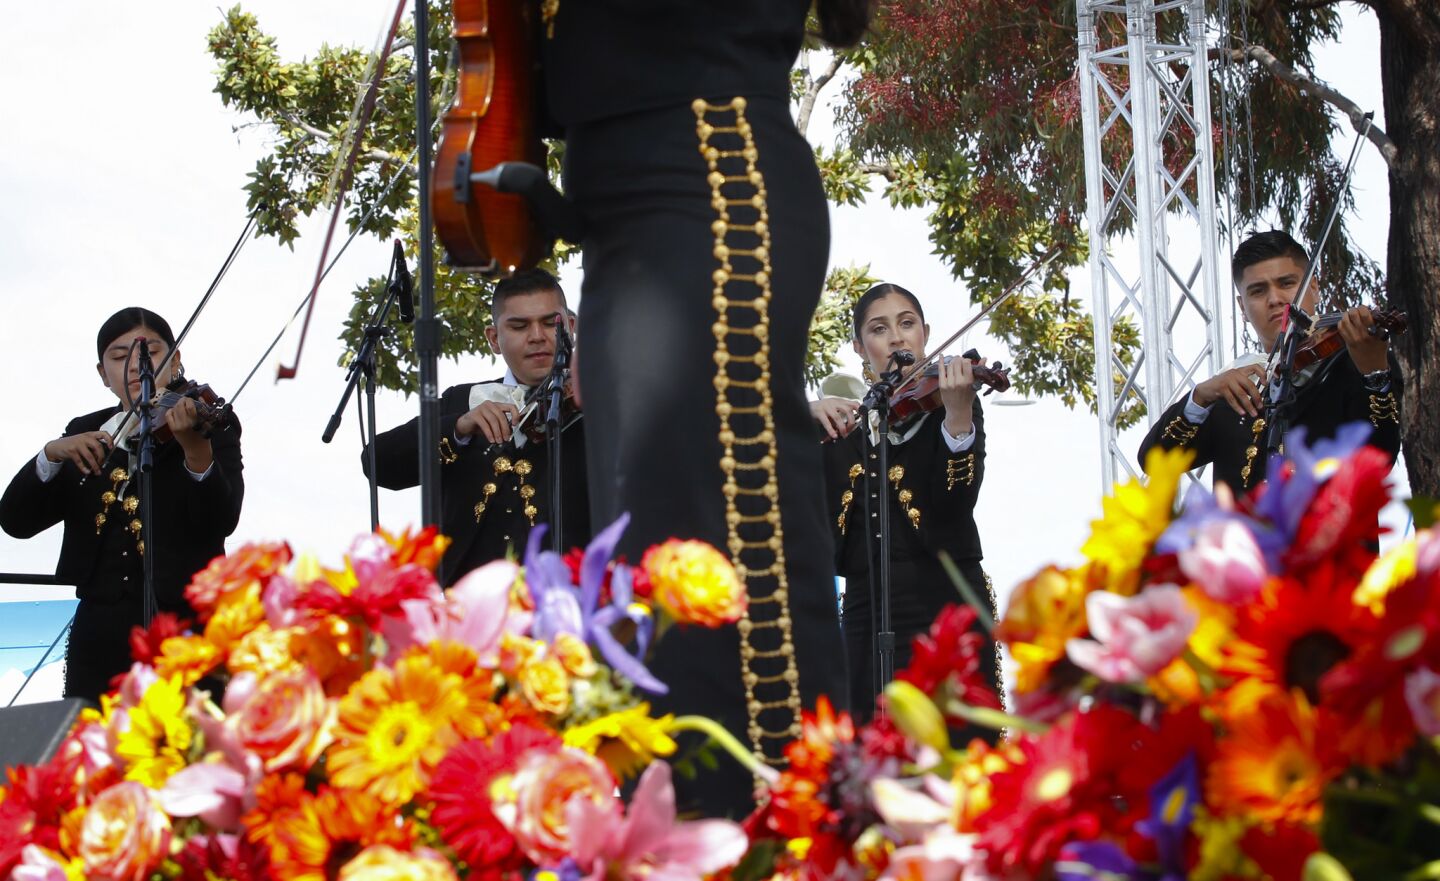 The violin line from Mariachi Estrellas de Chula Vista plays during a solo singing performance from one of their own fellow violinist. The group was performing on Sunday at the annual International Mariachi Festival in National City.